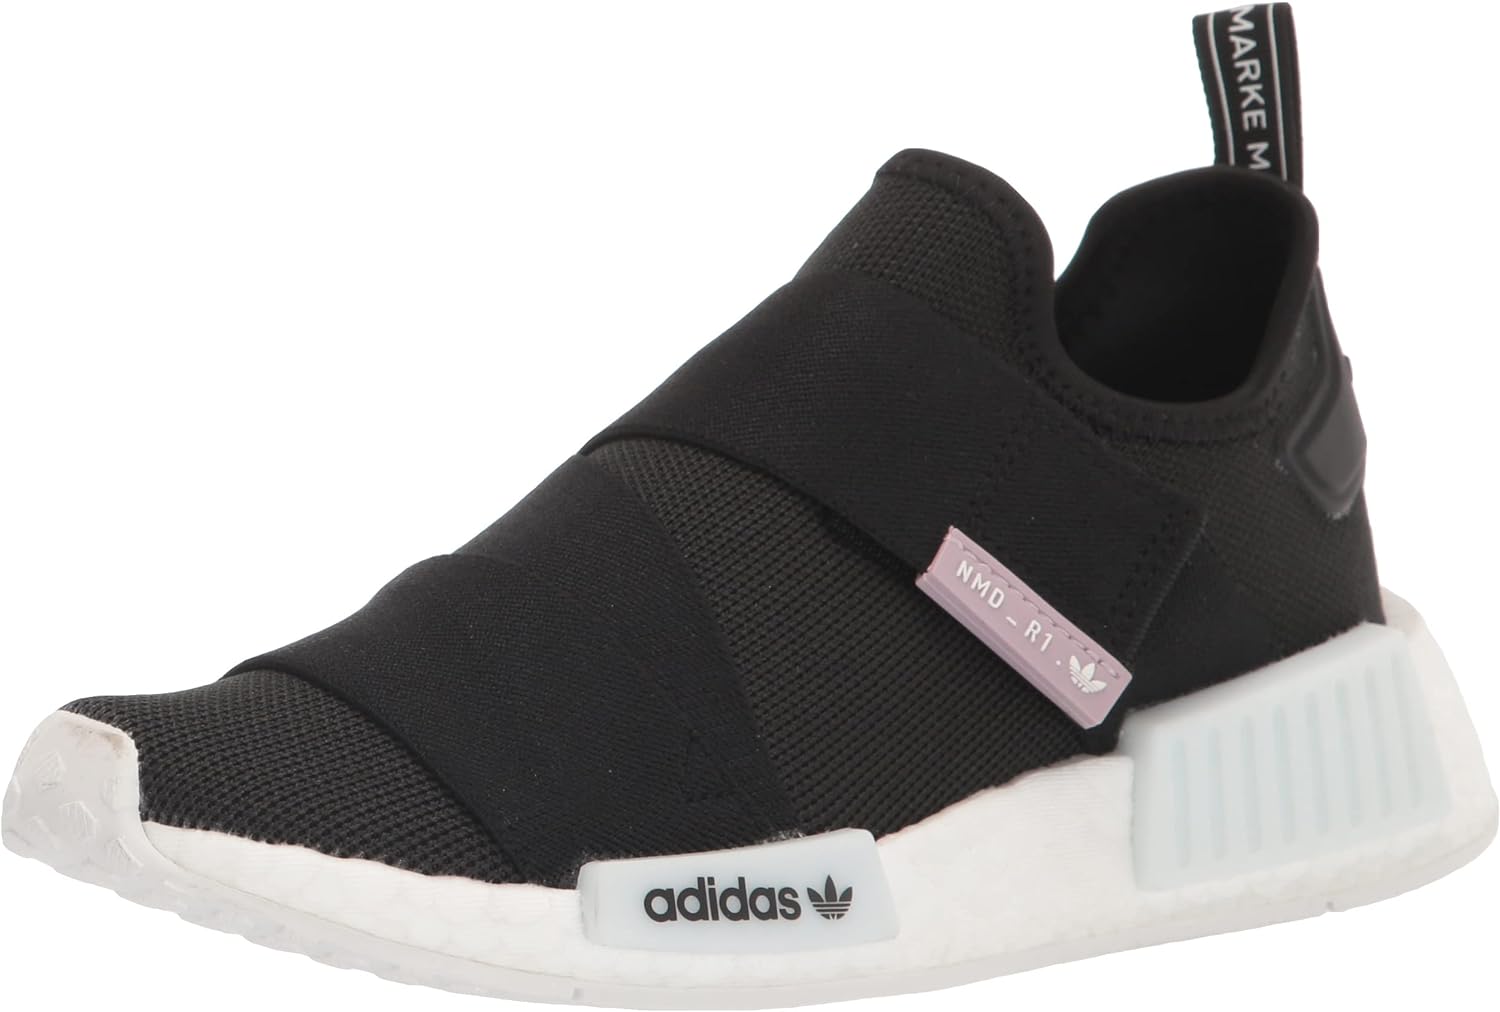 adidas Women’s NMD R1 Slip On Shoes